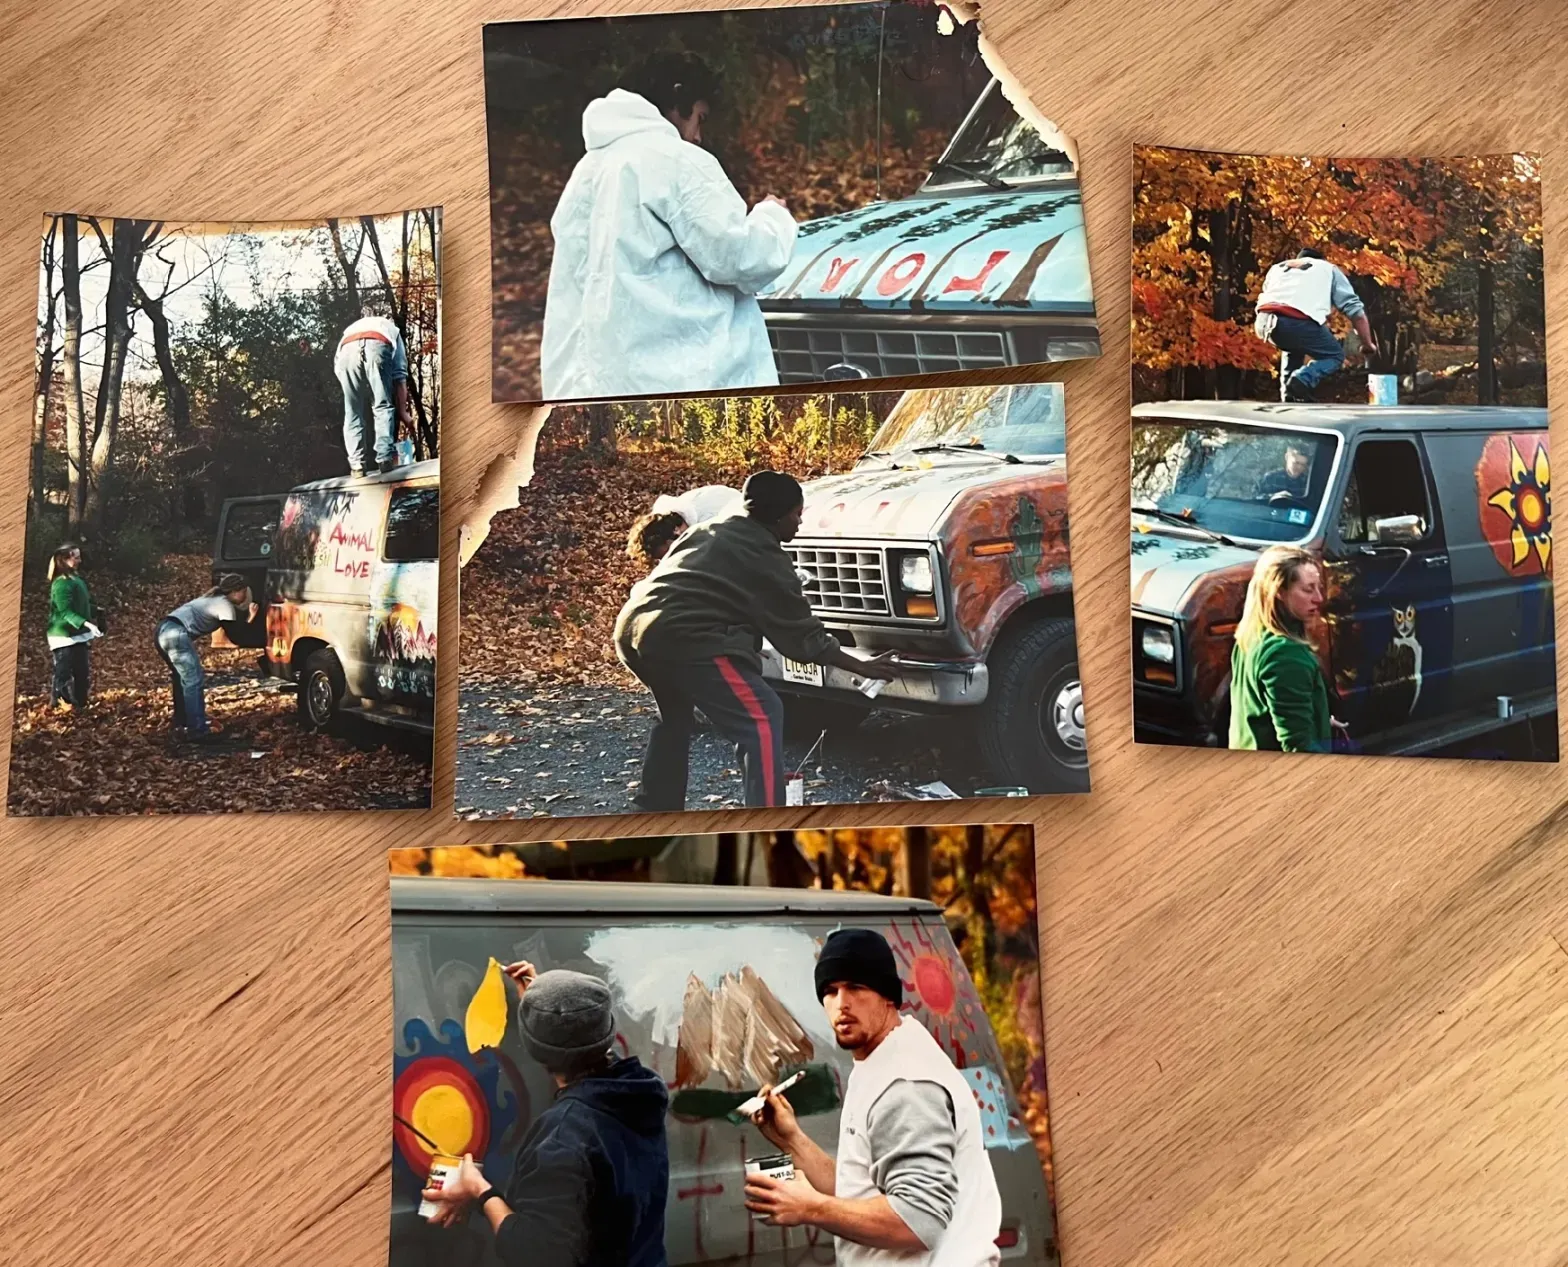 Six restored photos of men and women in a forested area repainting a Ford van with images of flowers and mountains, probably from the 1970s